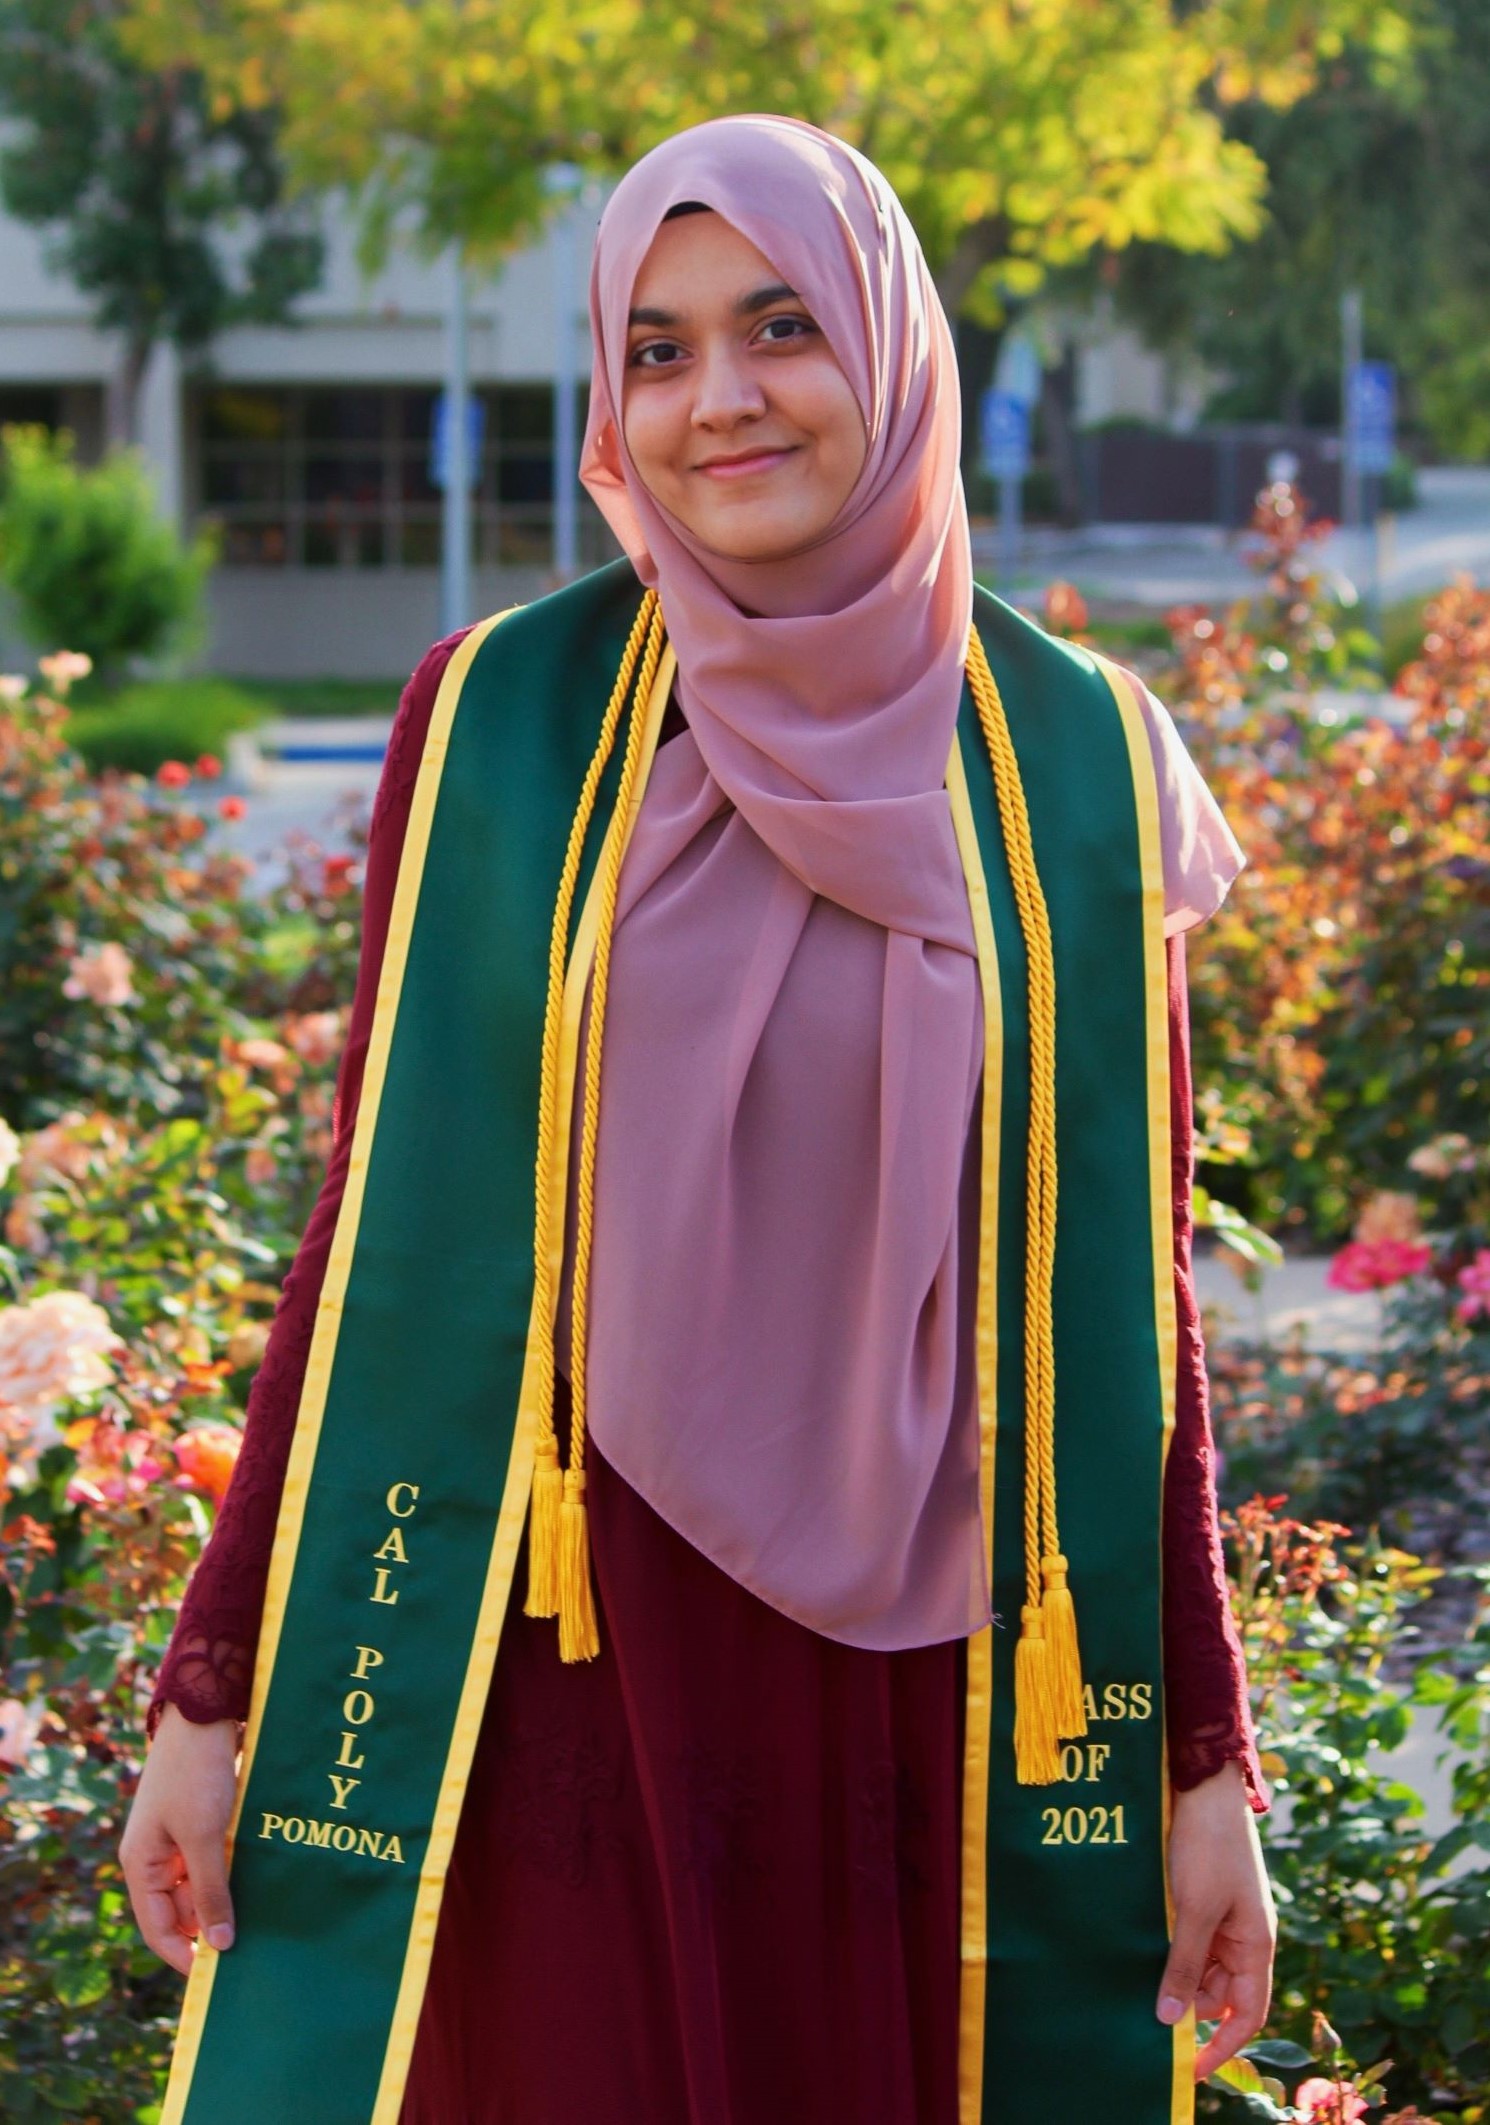 A female engineering student standing in front of a rose garden.